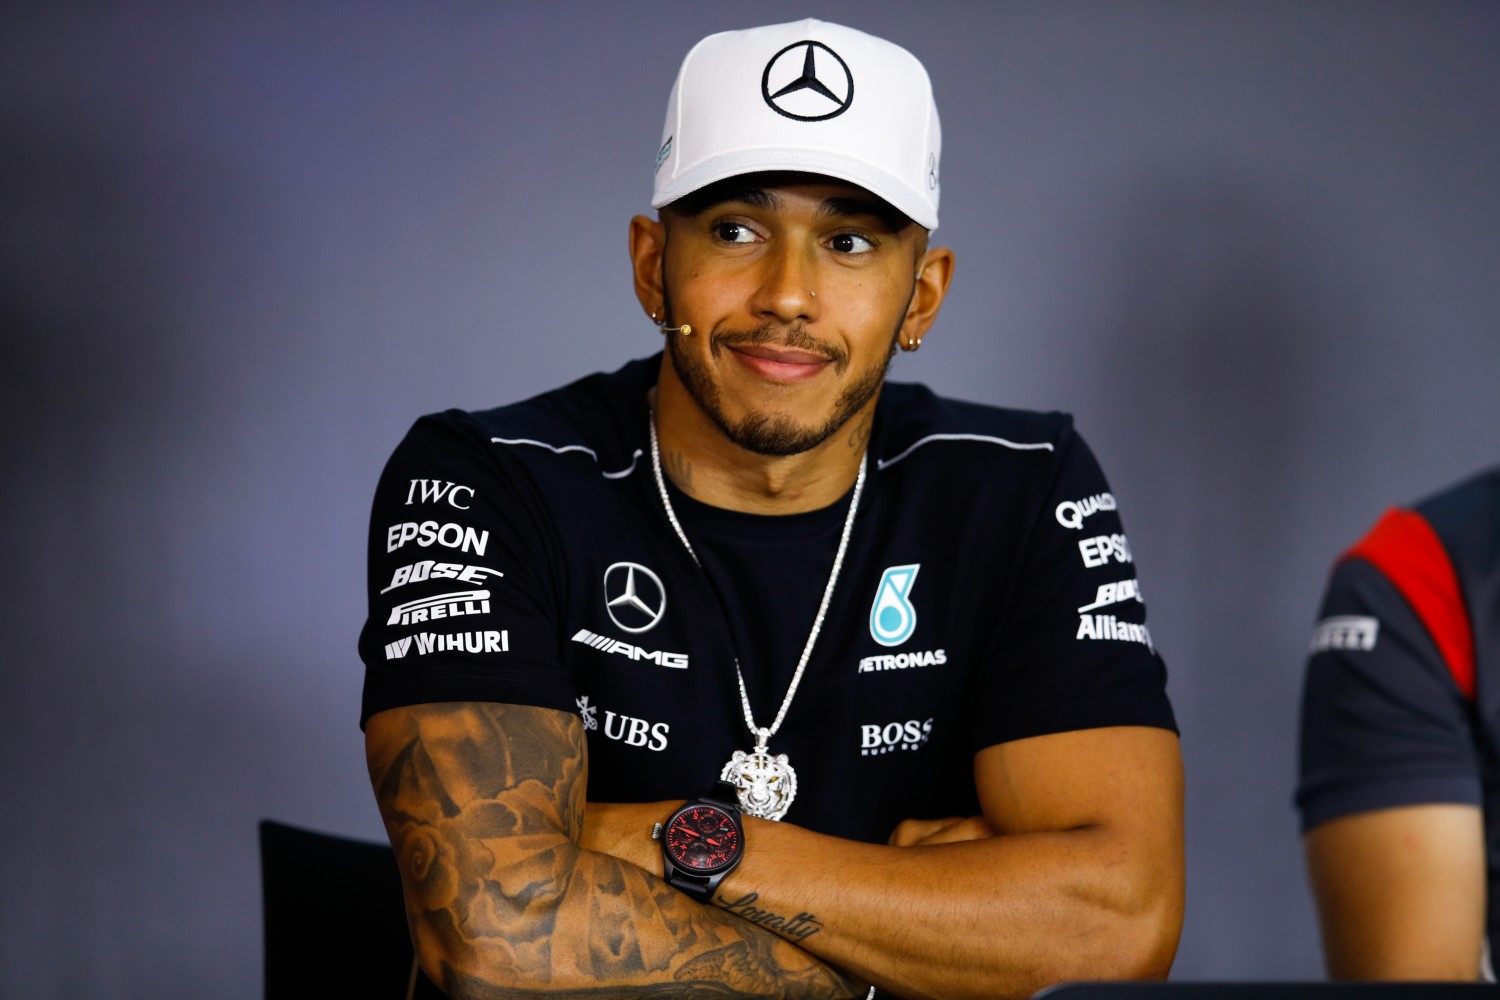 Hamilton isn't going anywhere - when you drive an Aldo Costa designed car you win poles, races and titles